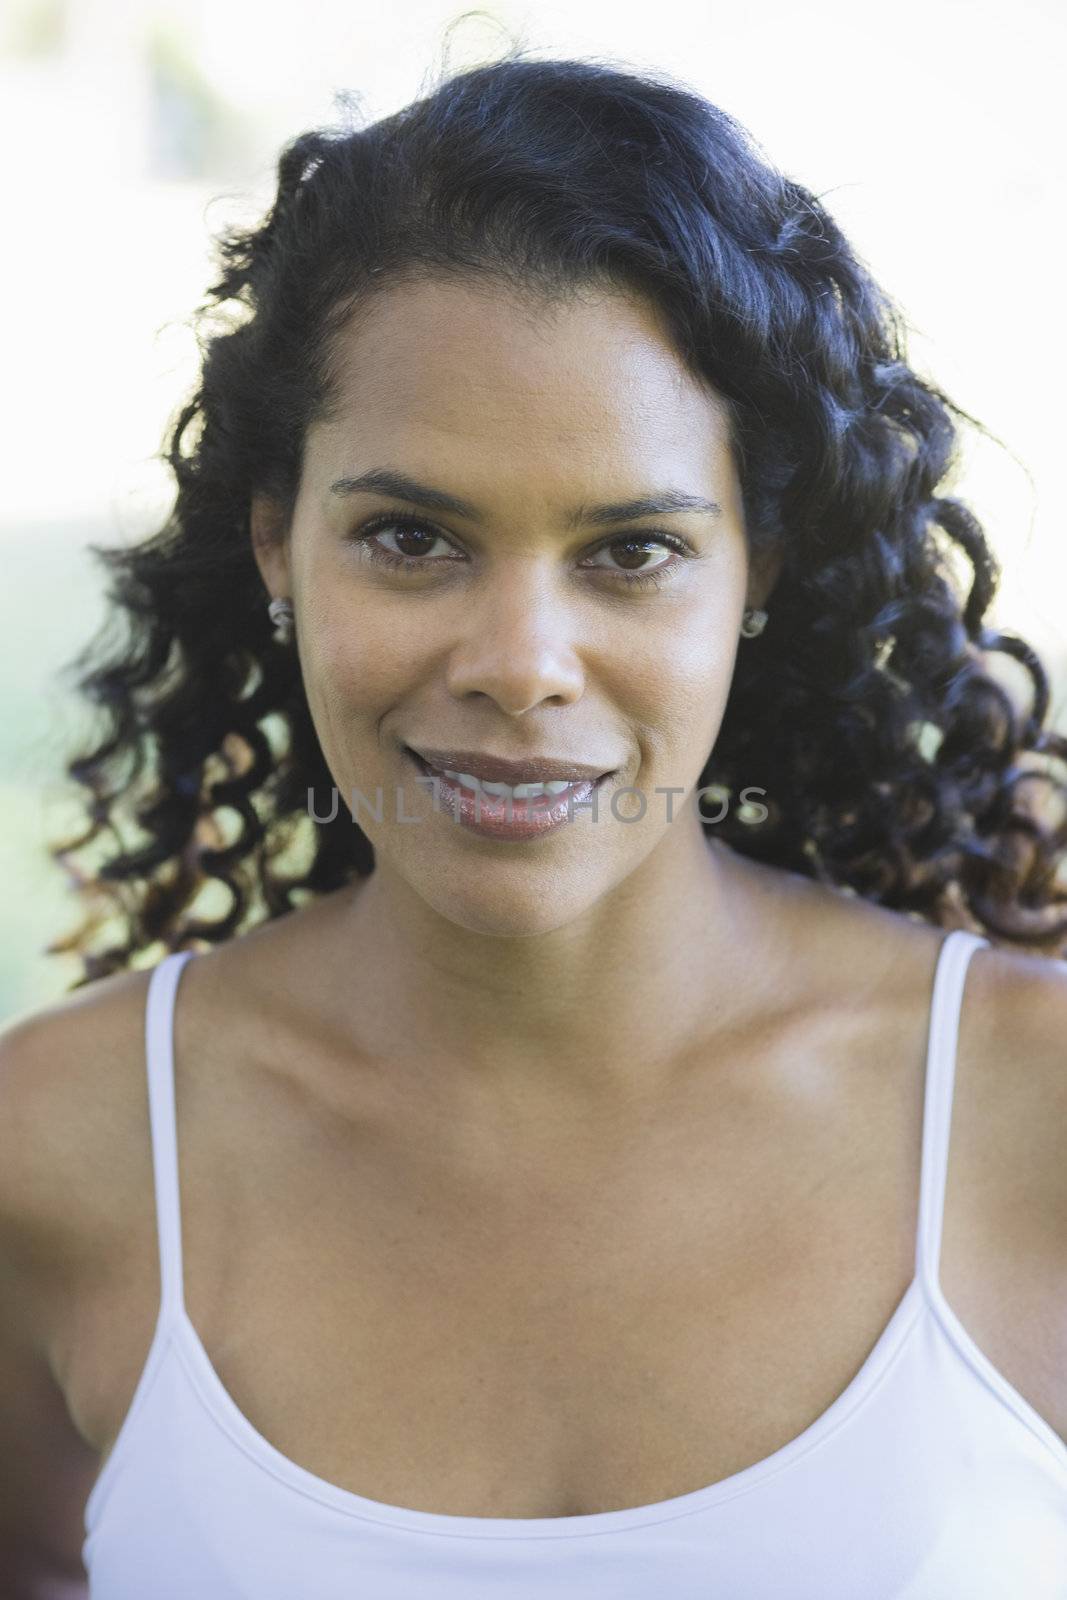 Portrait of African American Woman Smiling and Looking at Camera